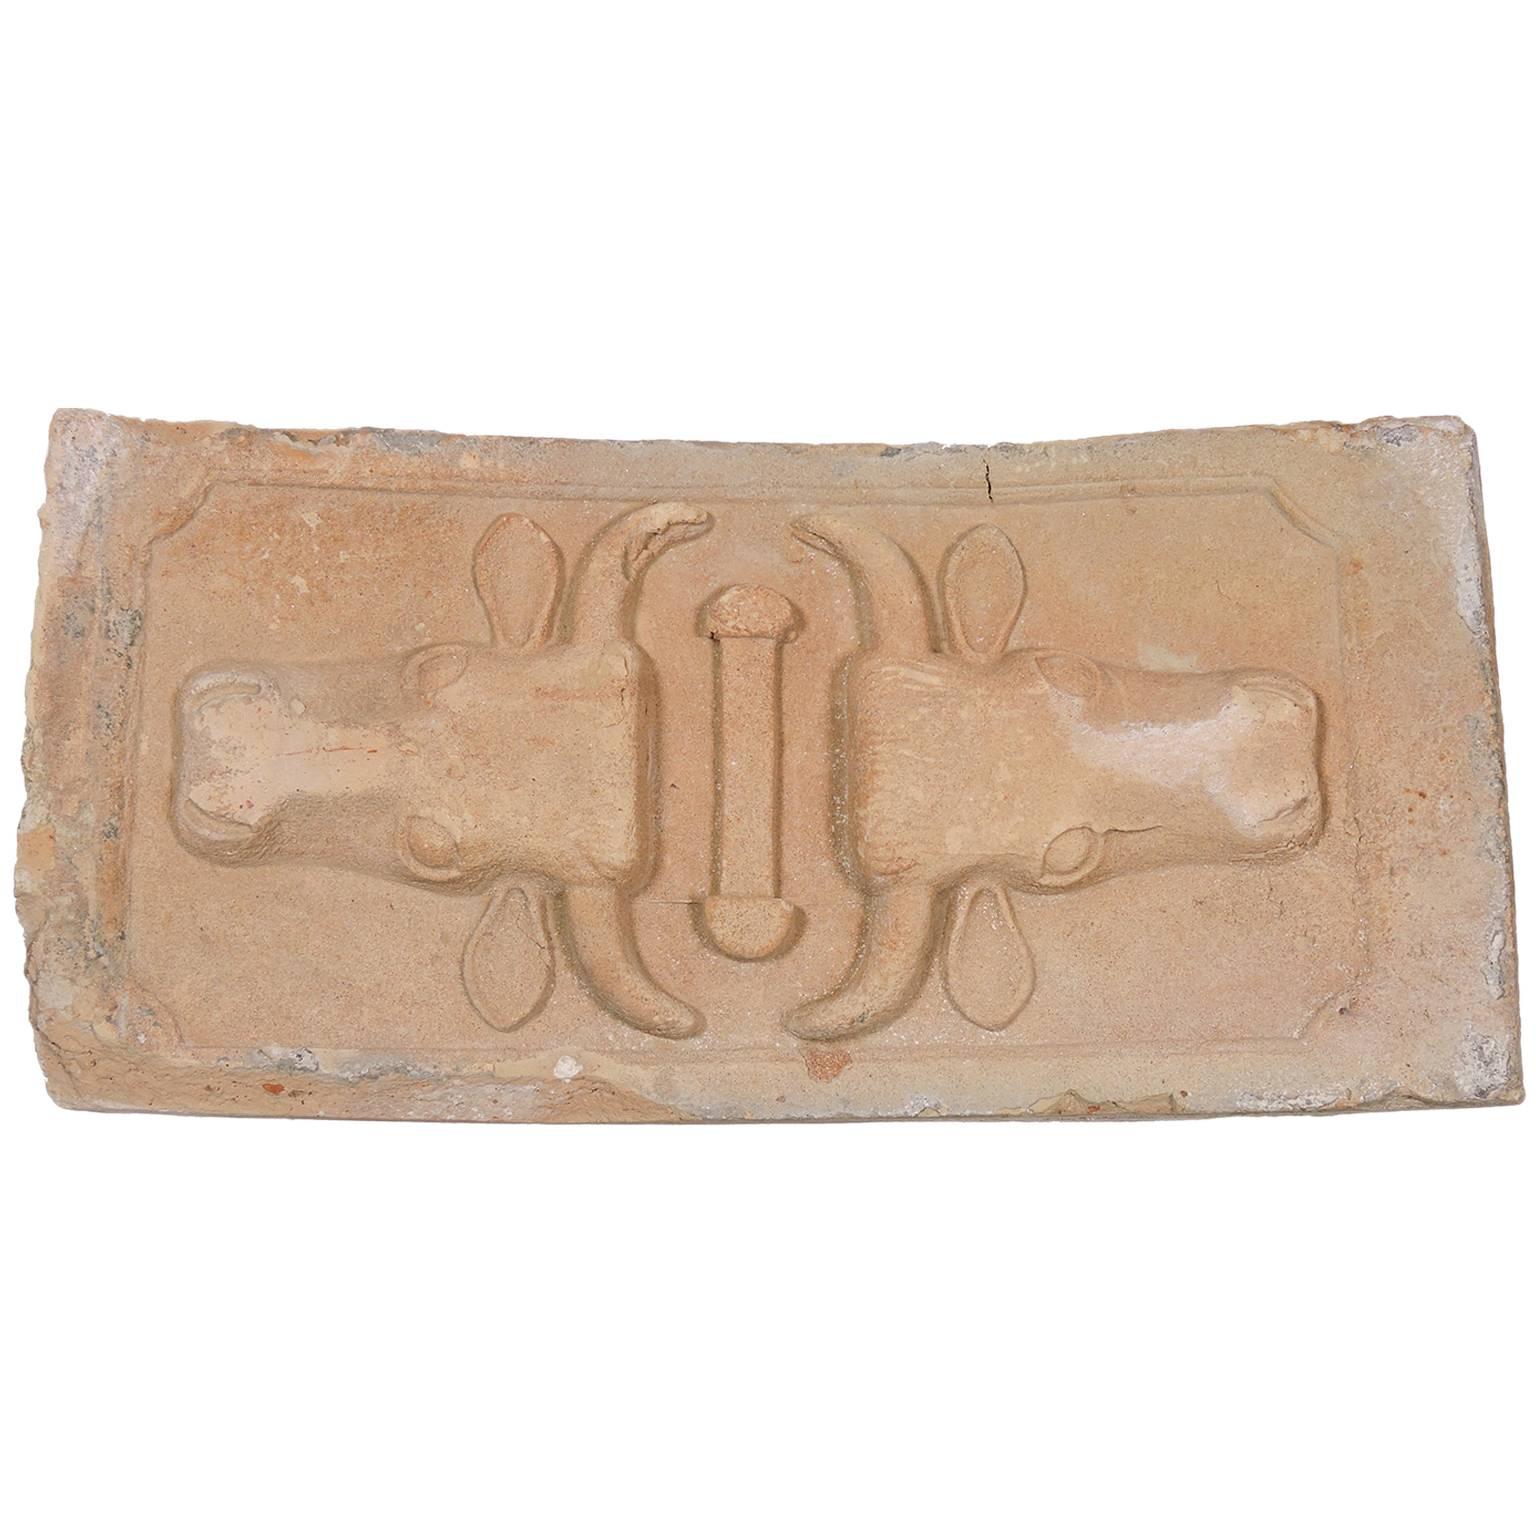 19th Century Carved Sandstone Architectural Element with Double Bulls Heads For Sale